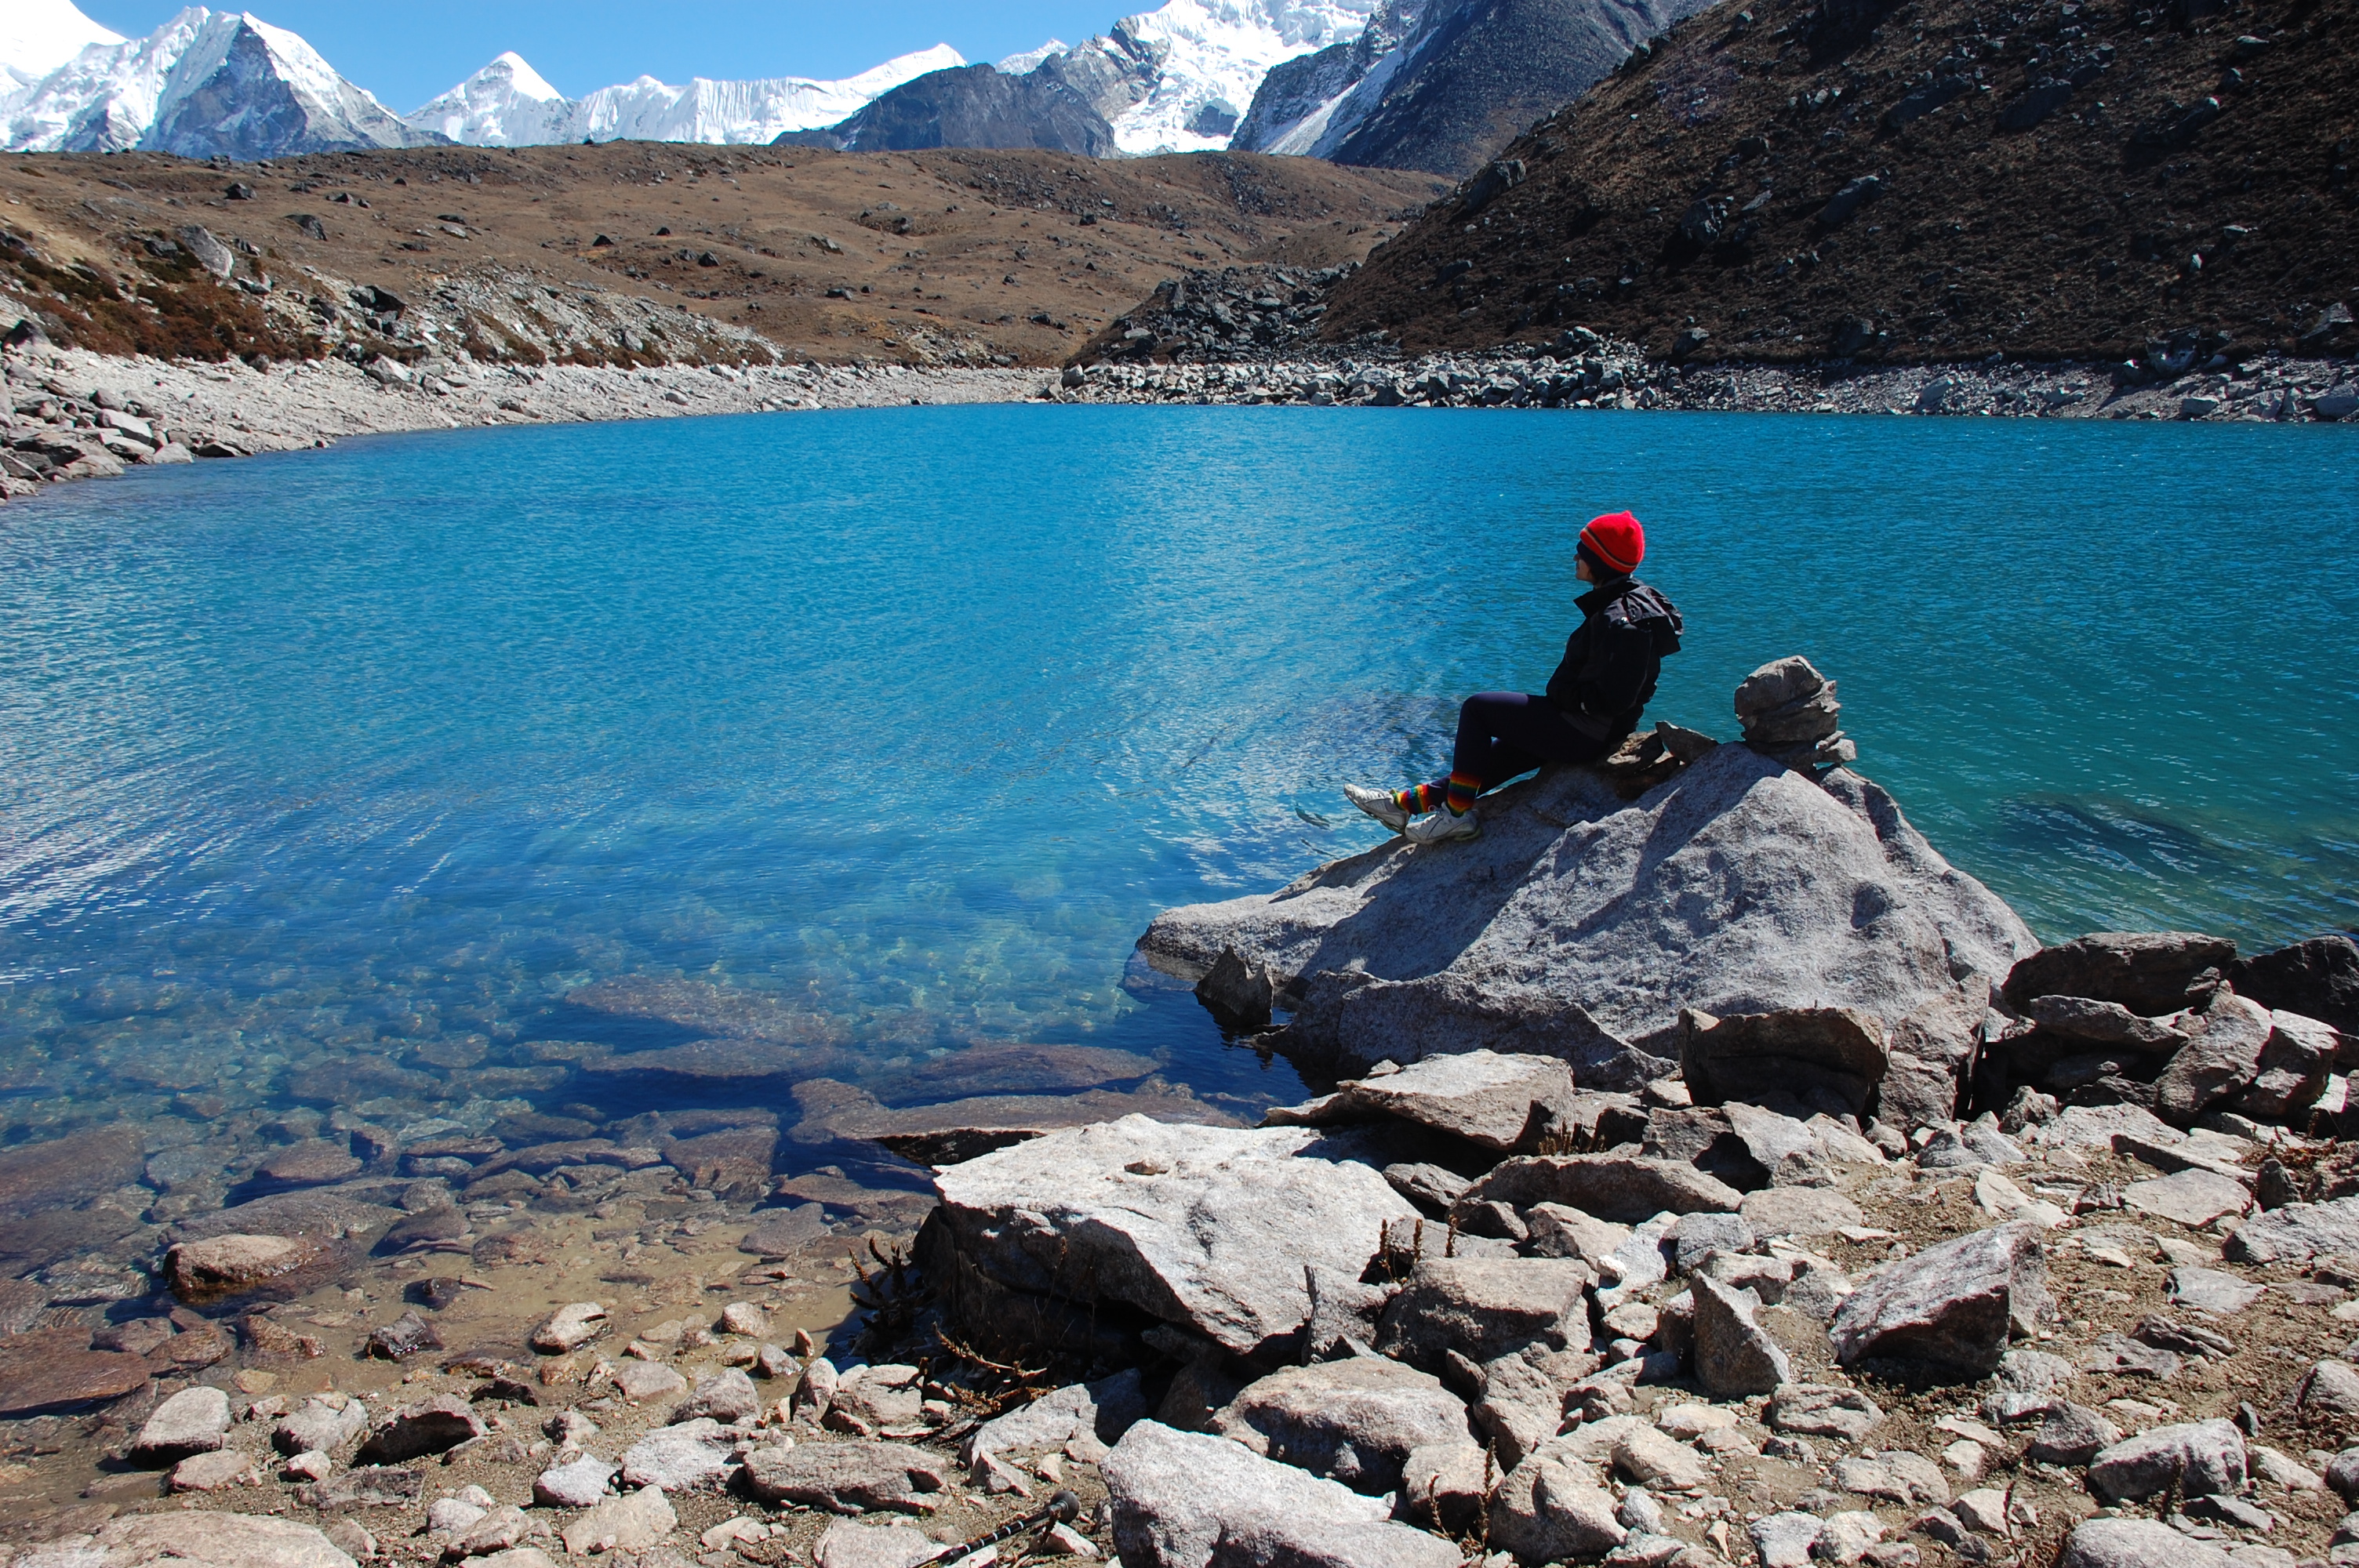 The writer at the Ama Dablam lake on the Everest trekking route